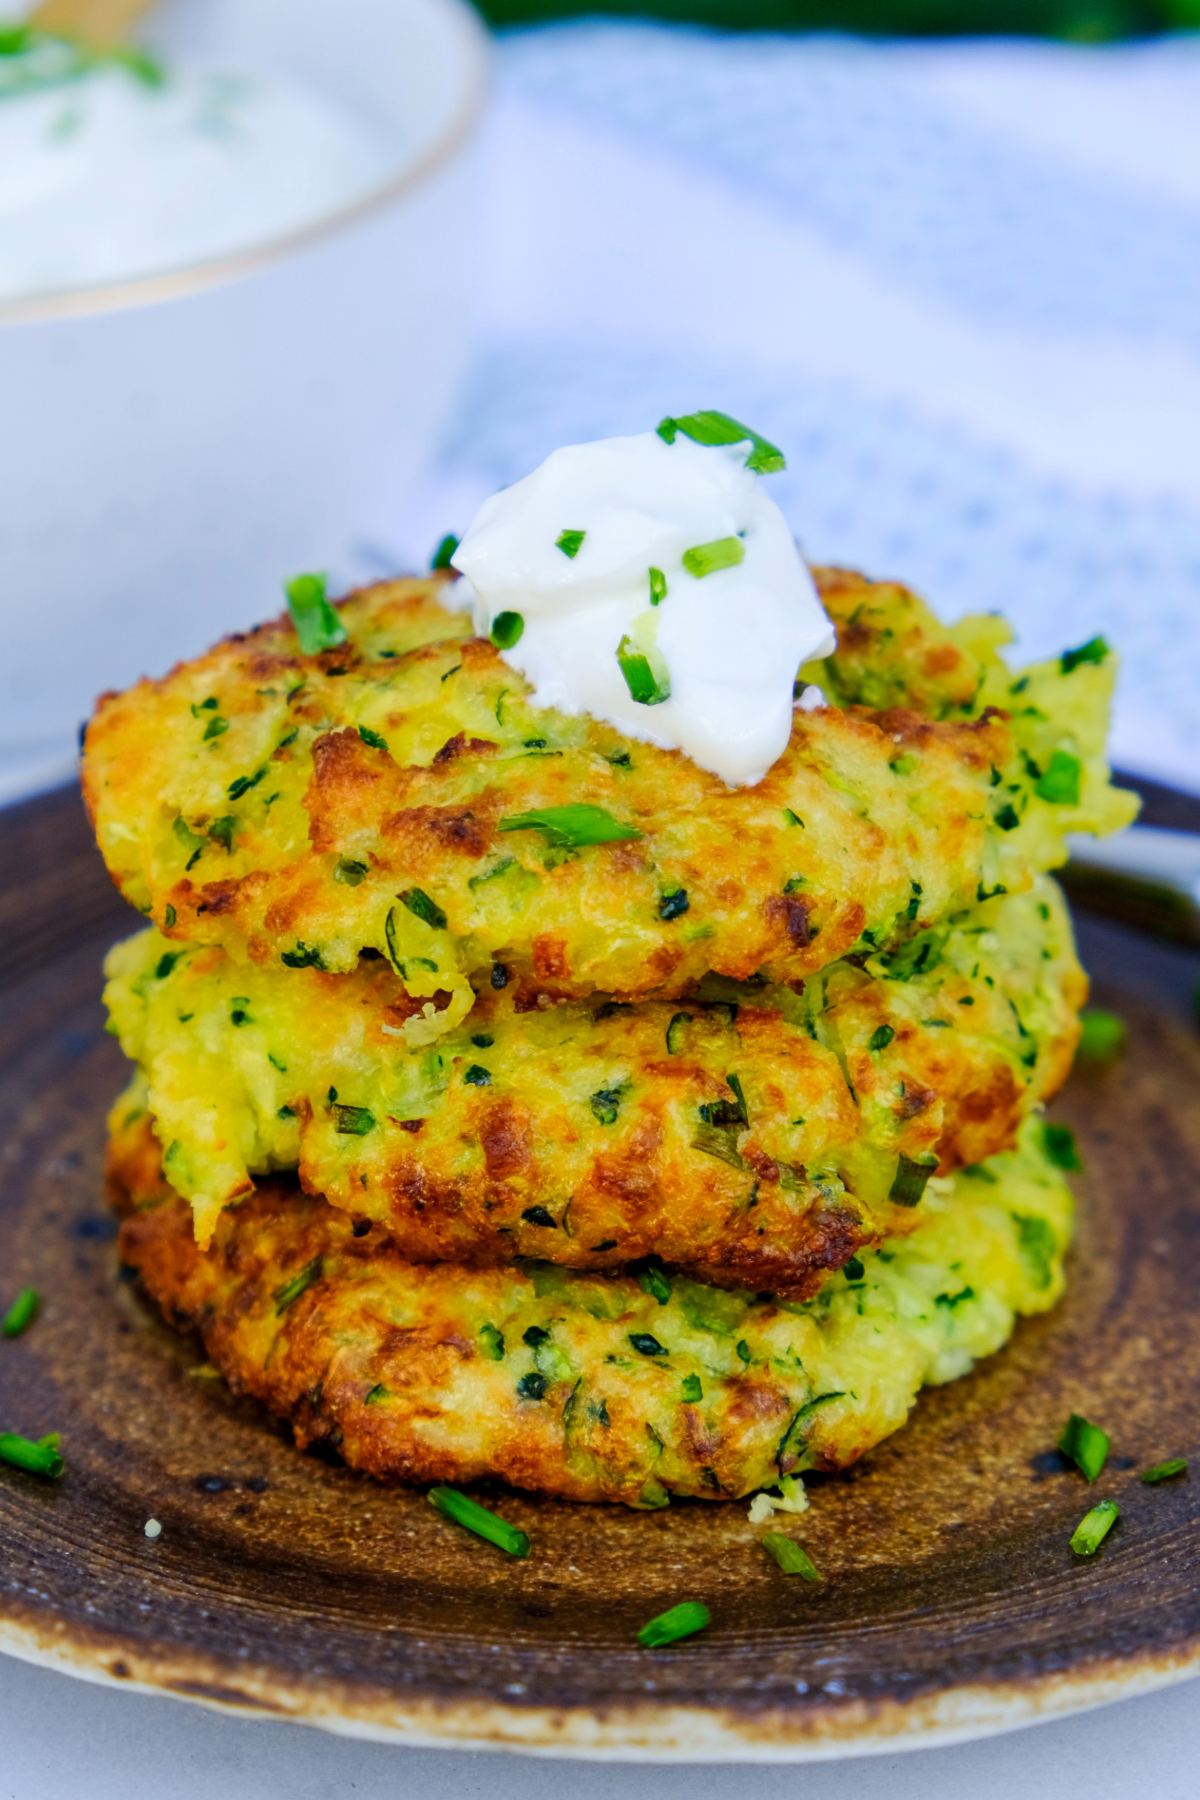 Easy Air Fryer Zucchini Fritters Recipe - The Foodie Affair